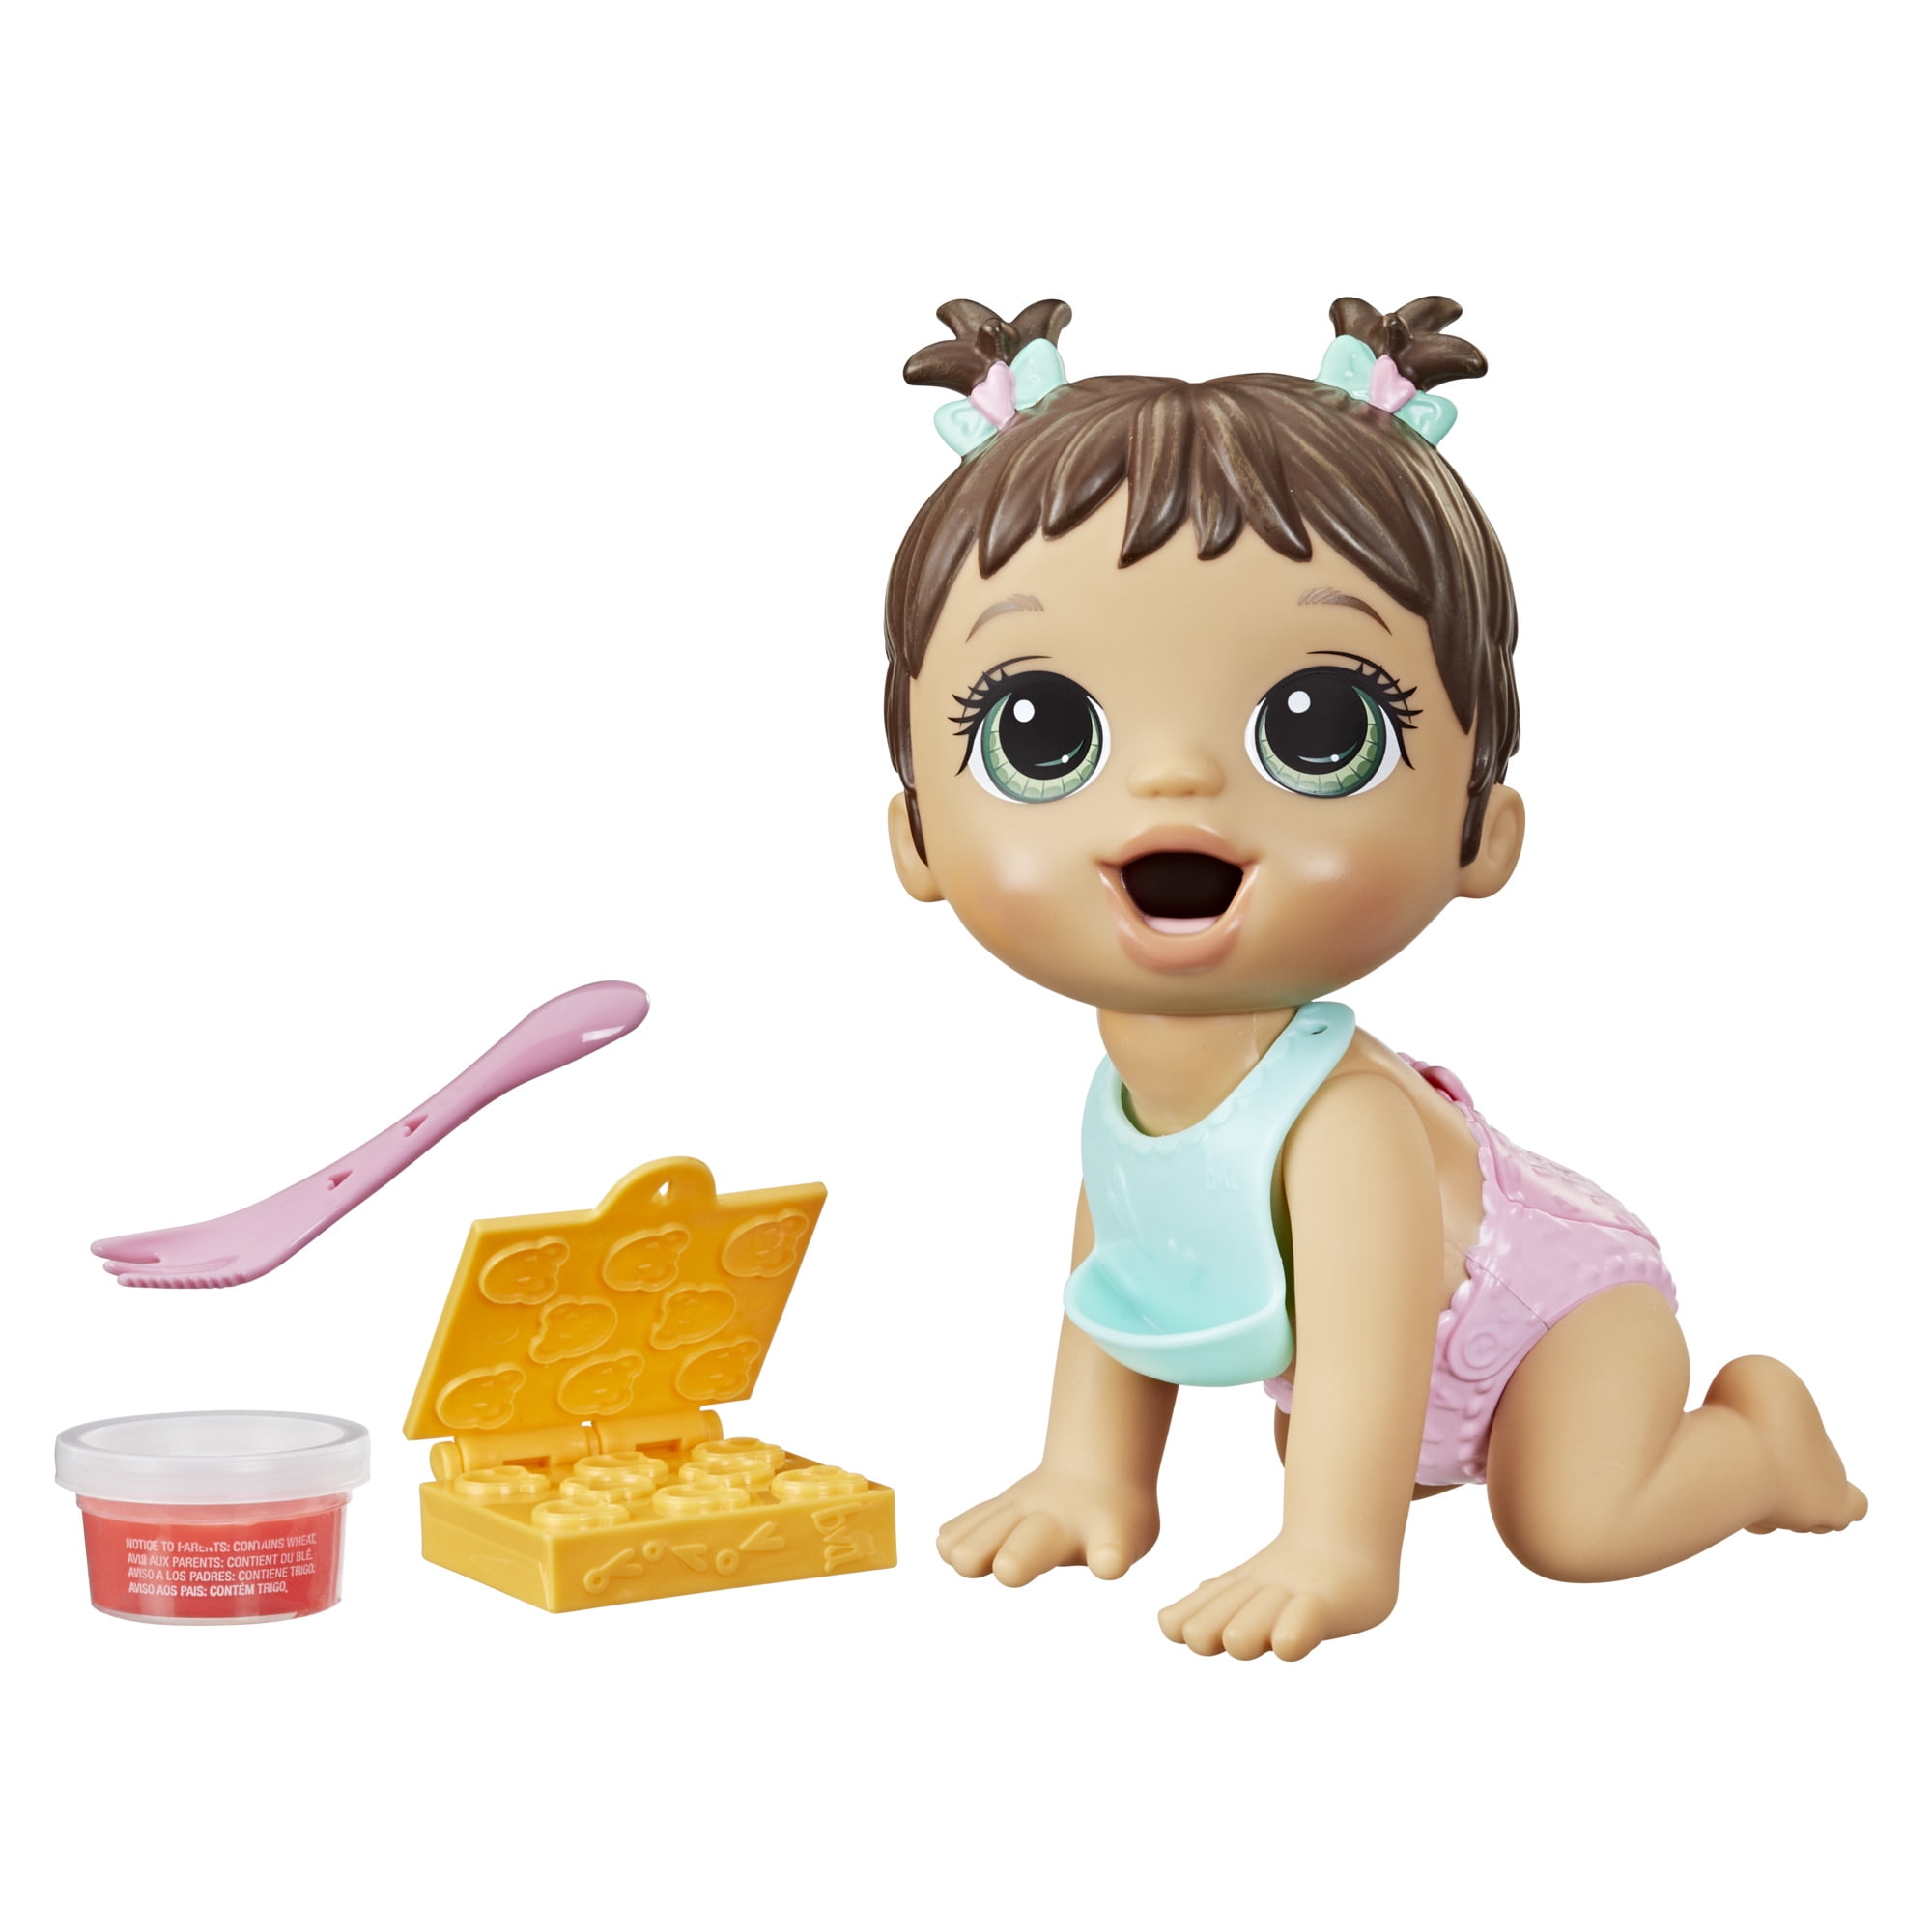 Baby Alive Lil Snacks Doll with Brown Hair, Eats and 